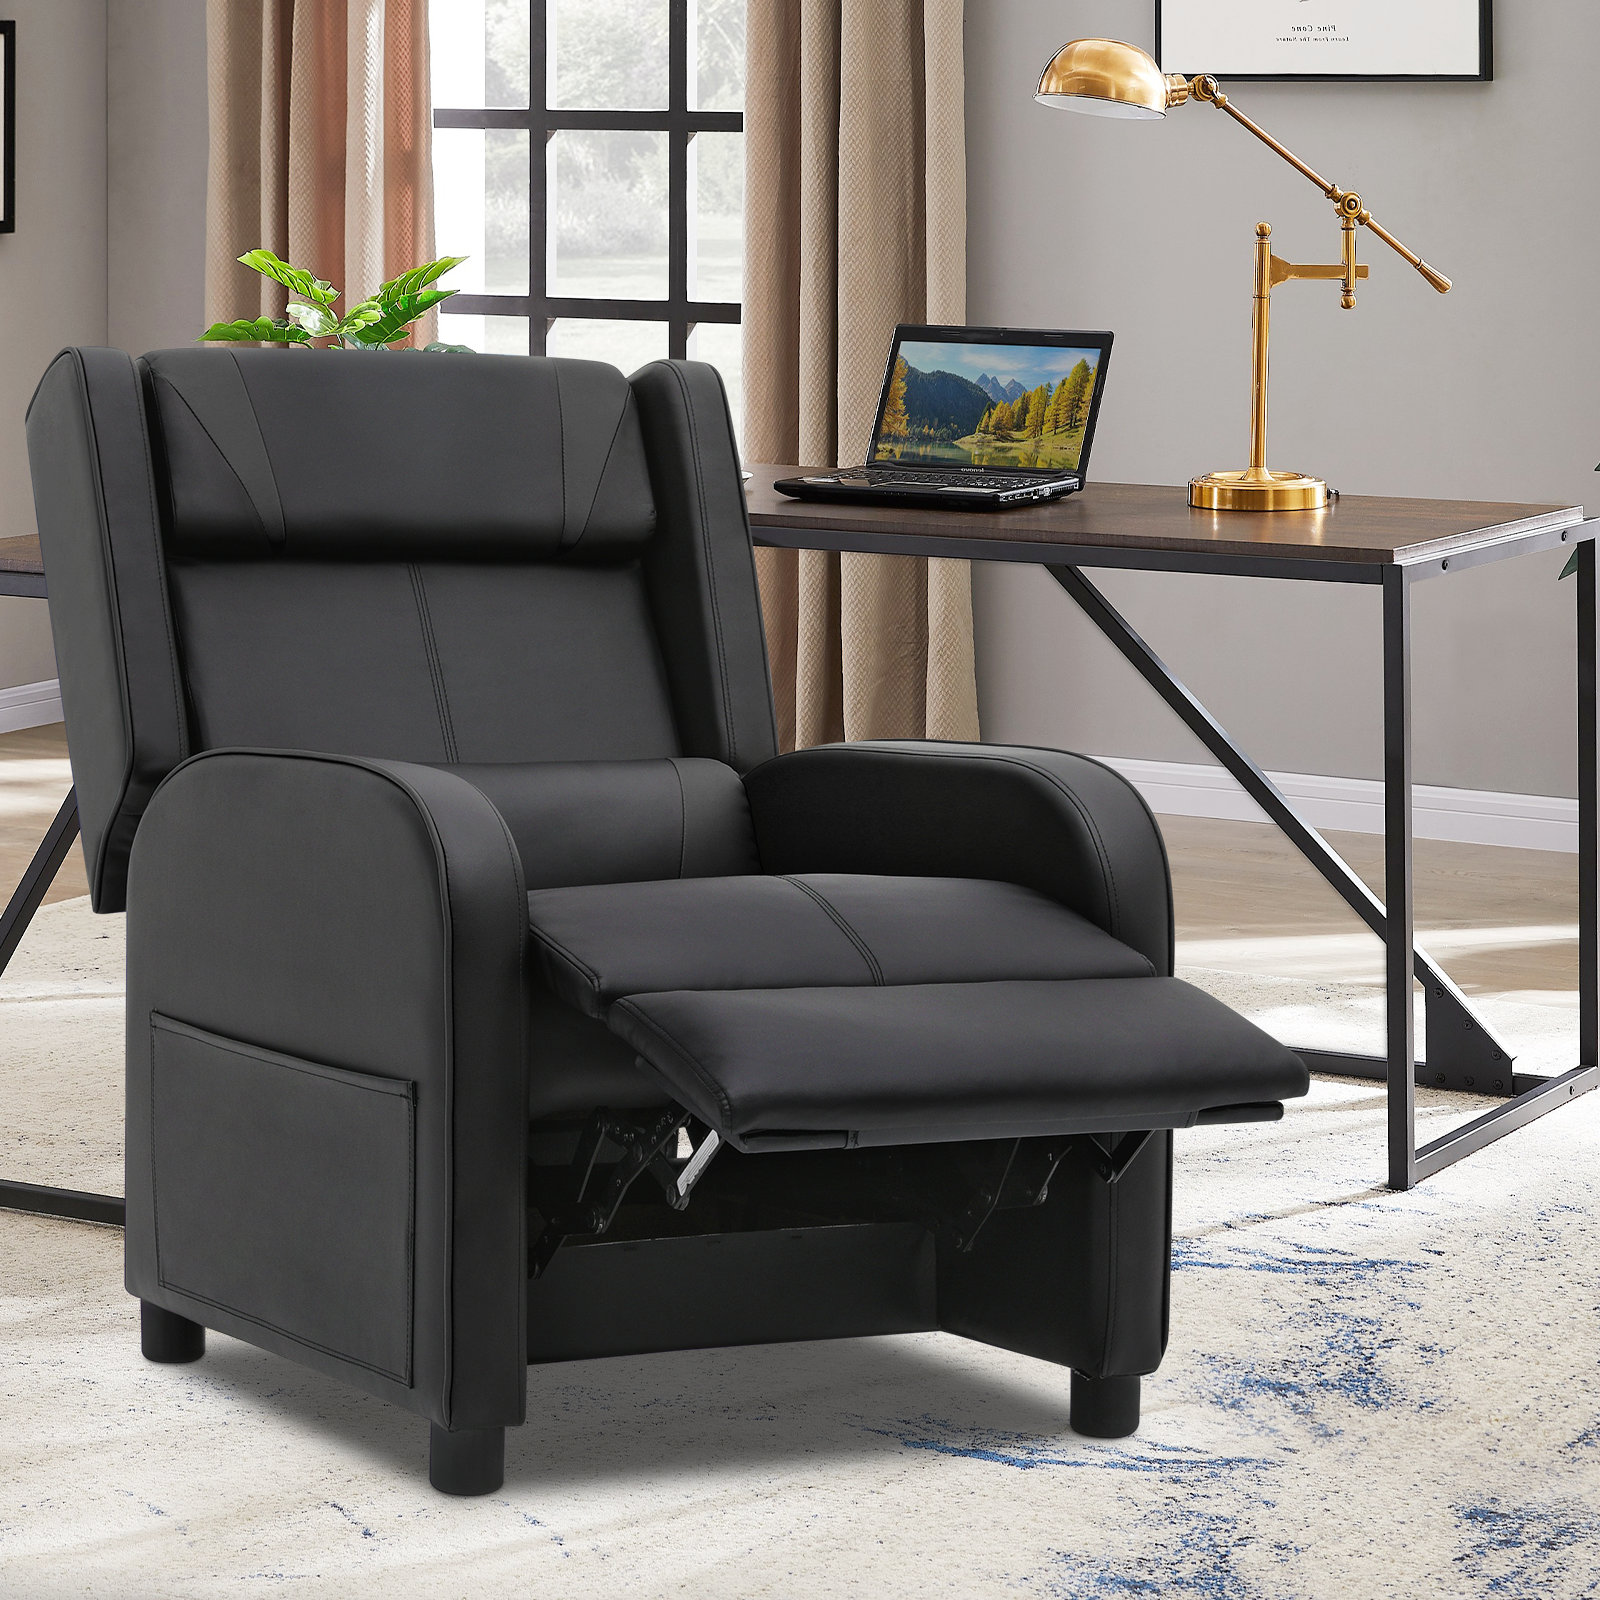 Support and Style: Finding the Ideal Recliner with Lumbar Support插图3